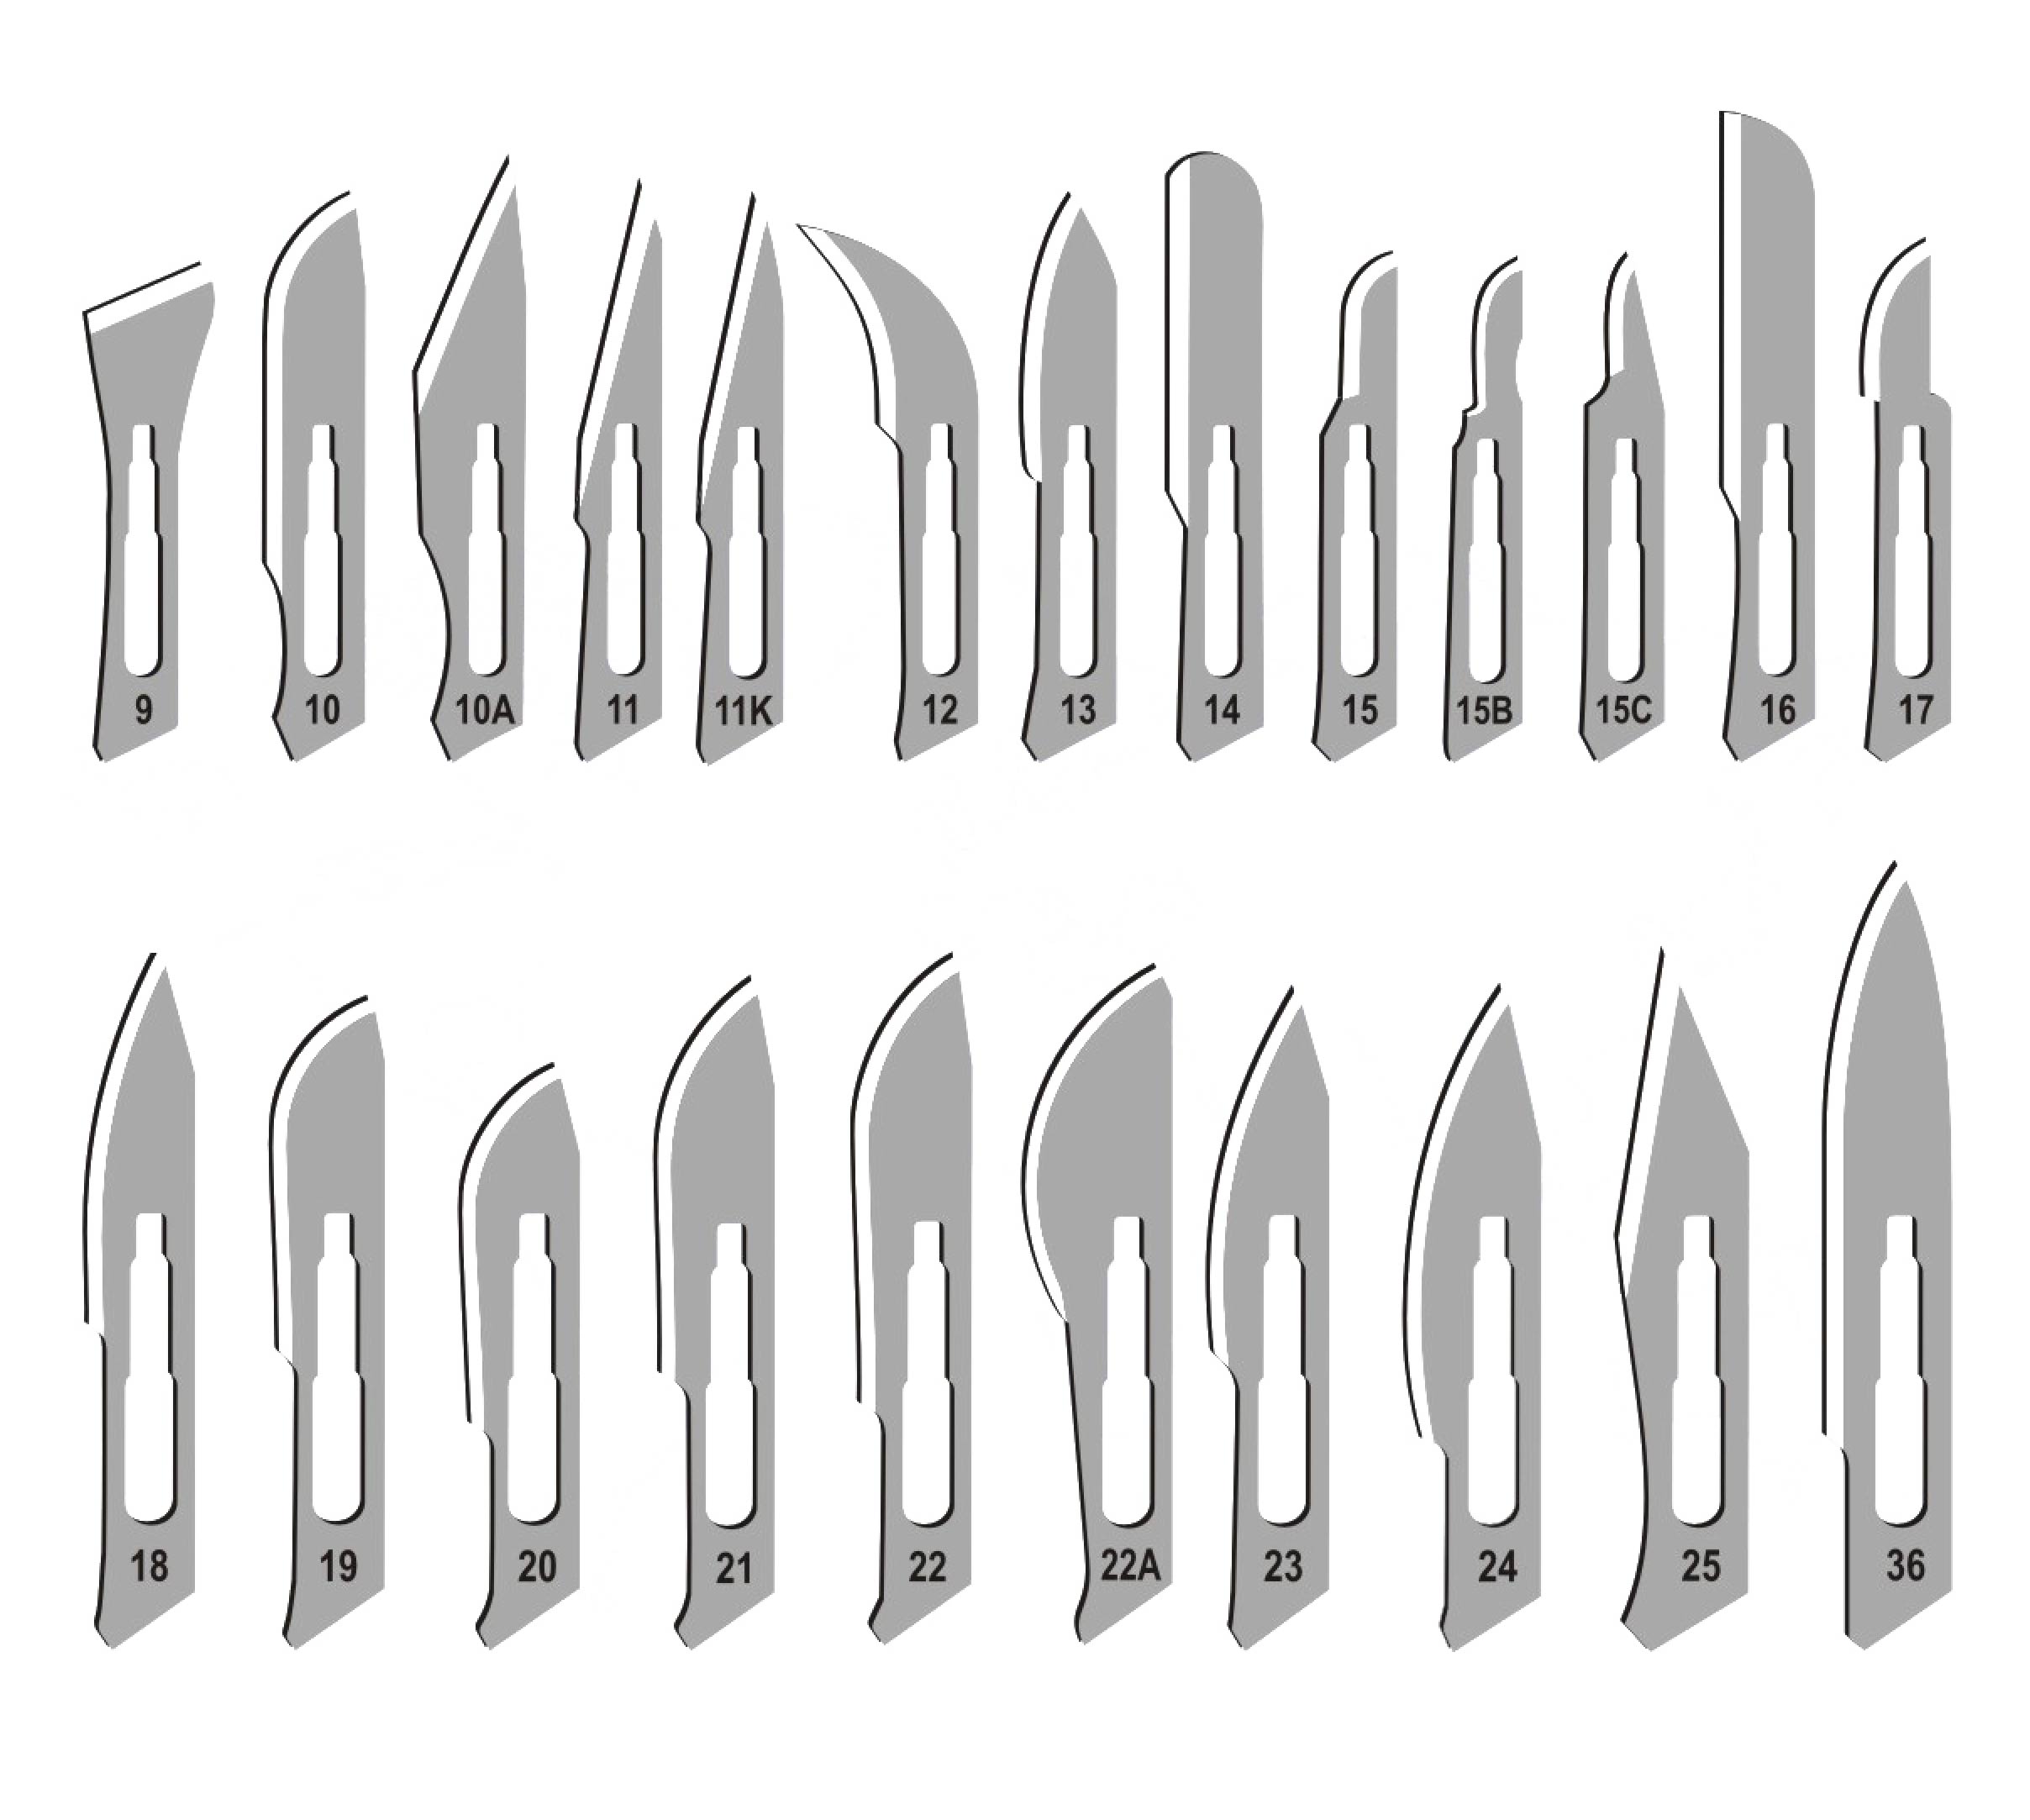 Uses of Surgical Blades